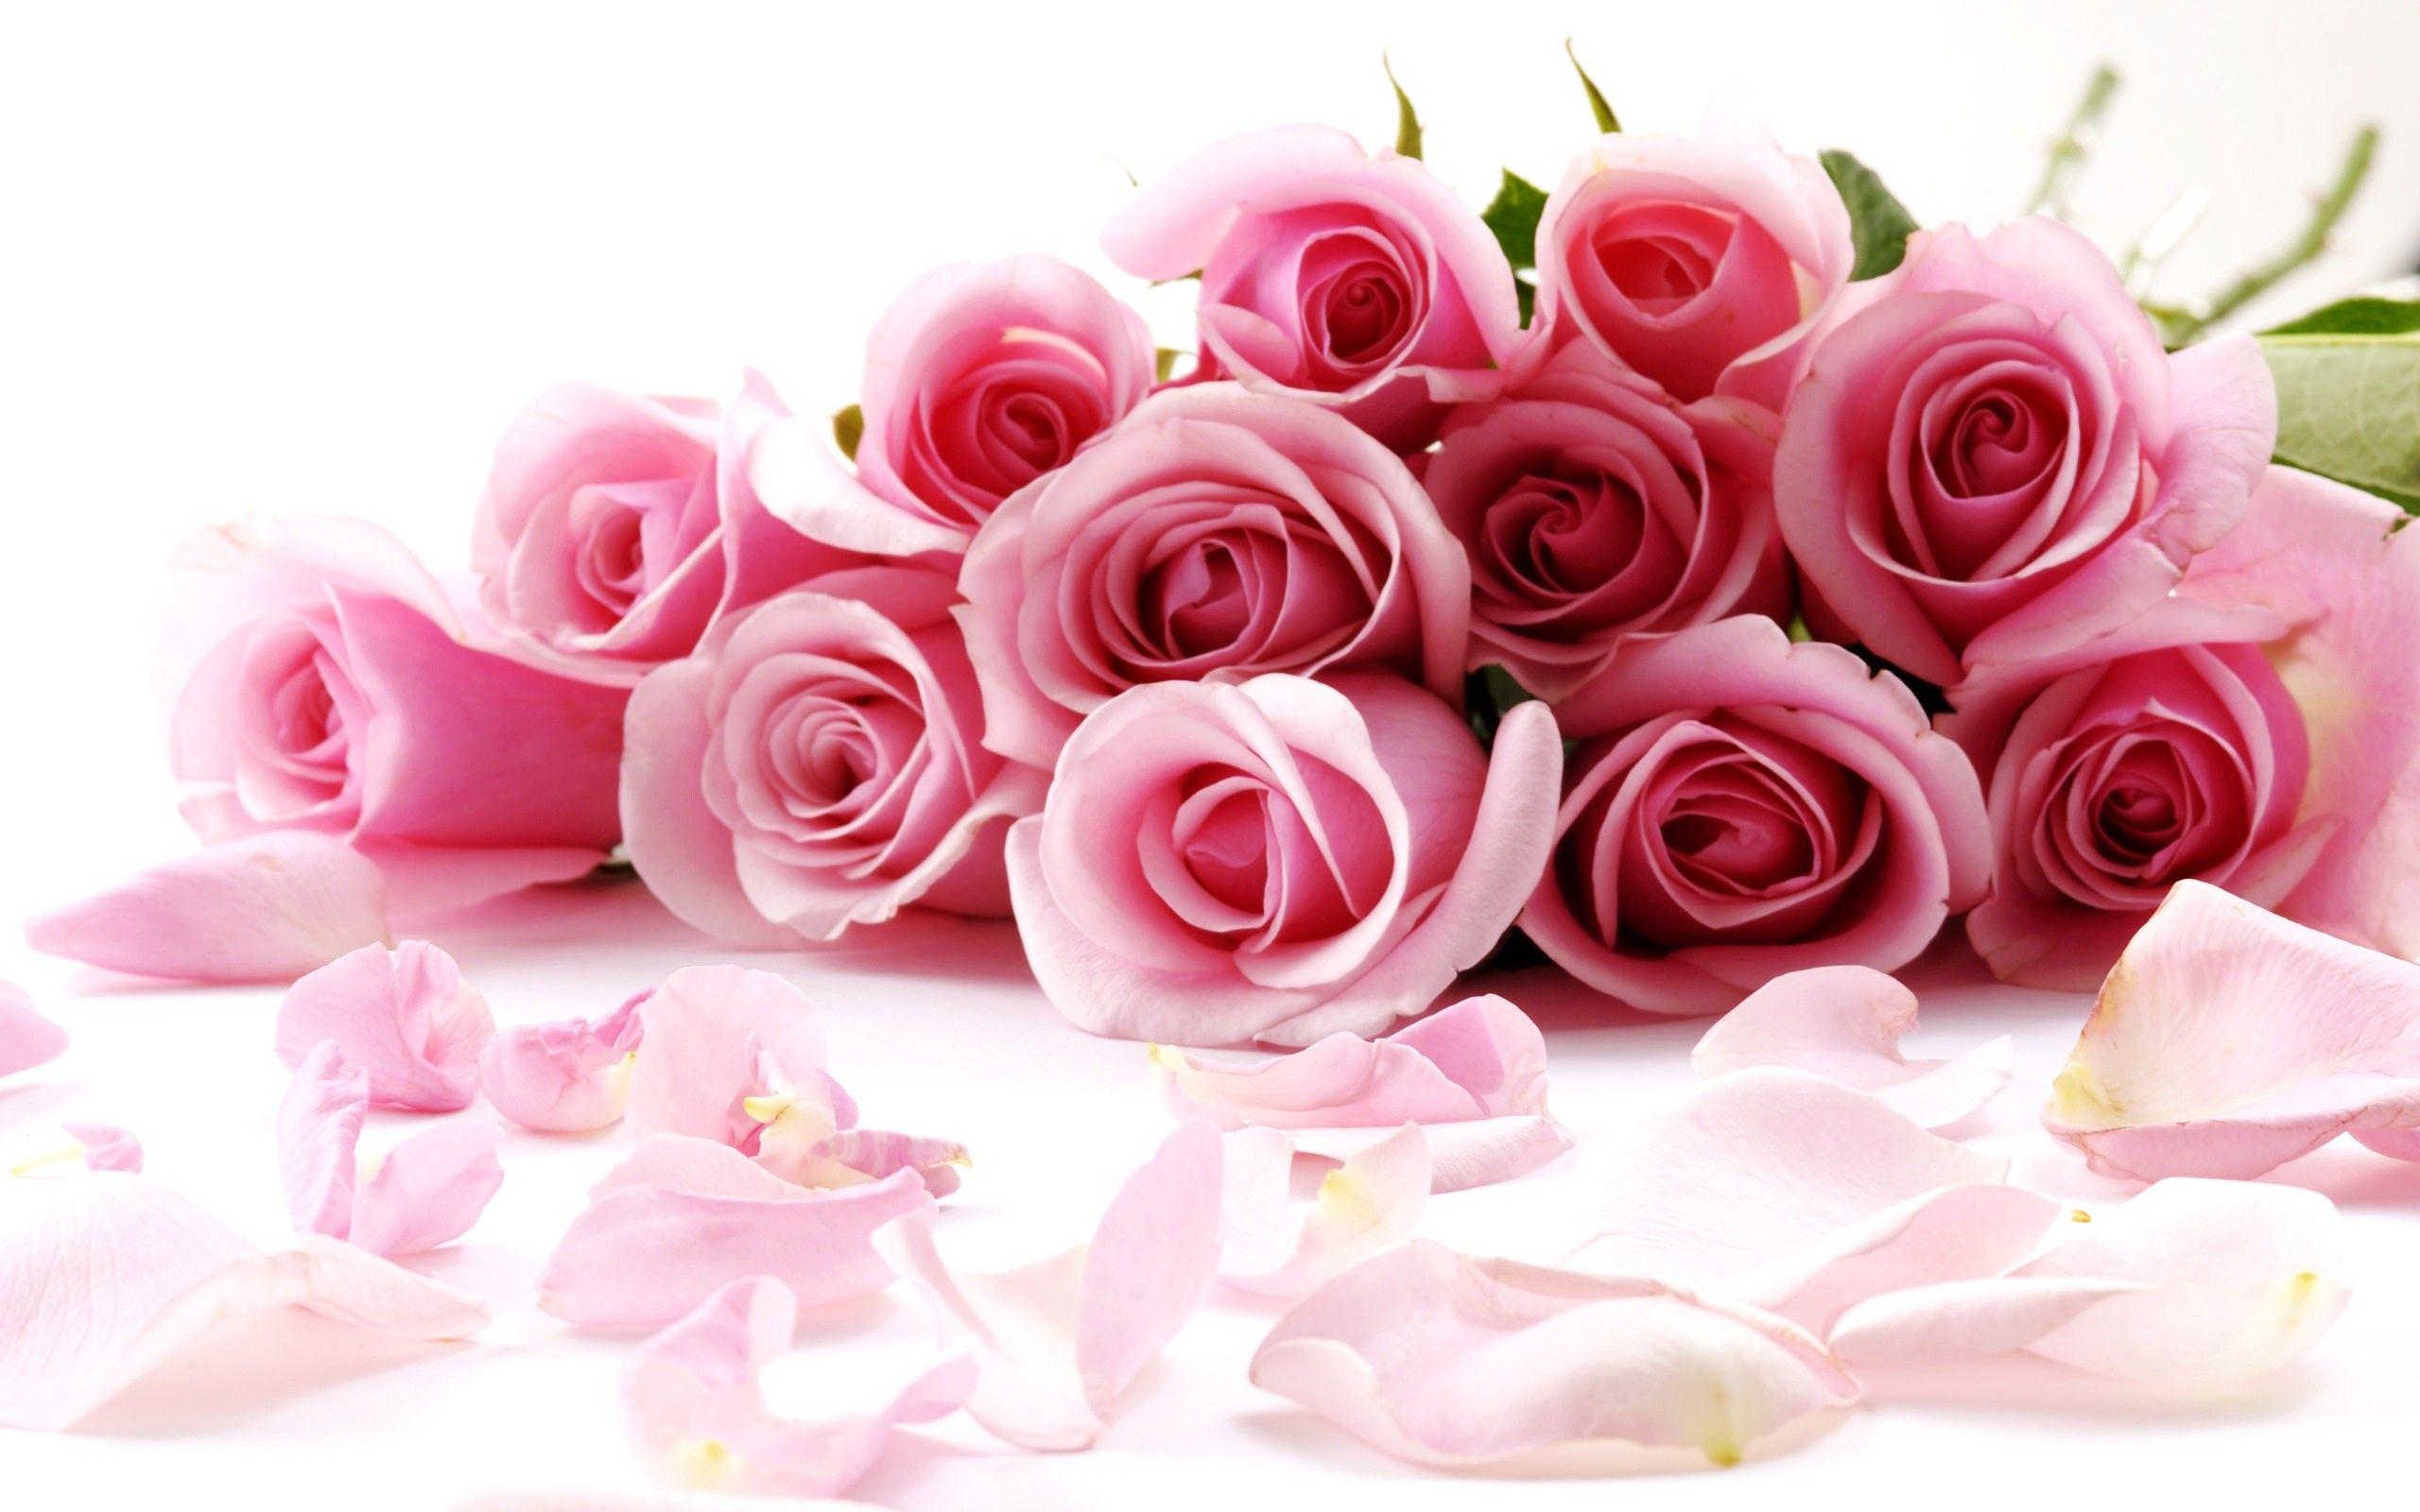 Rose Flower Wallpapers - Top Free Rose Flower Backgrounds - WallpaperAccess